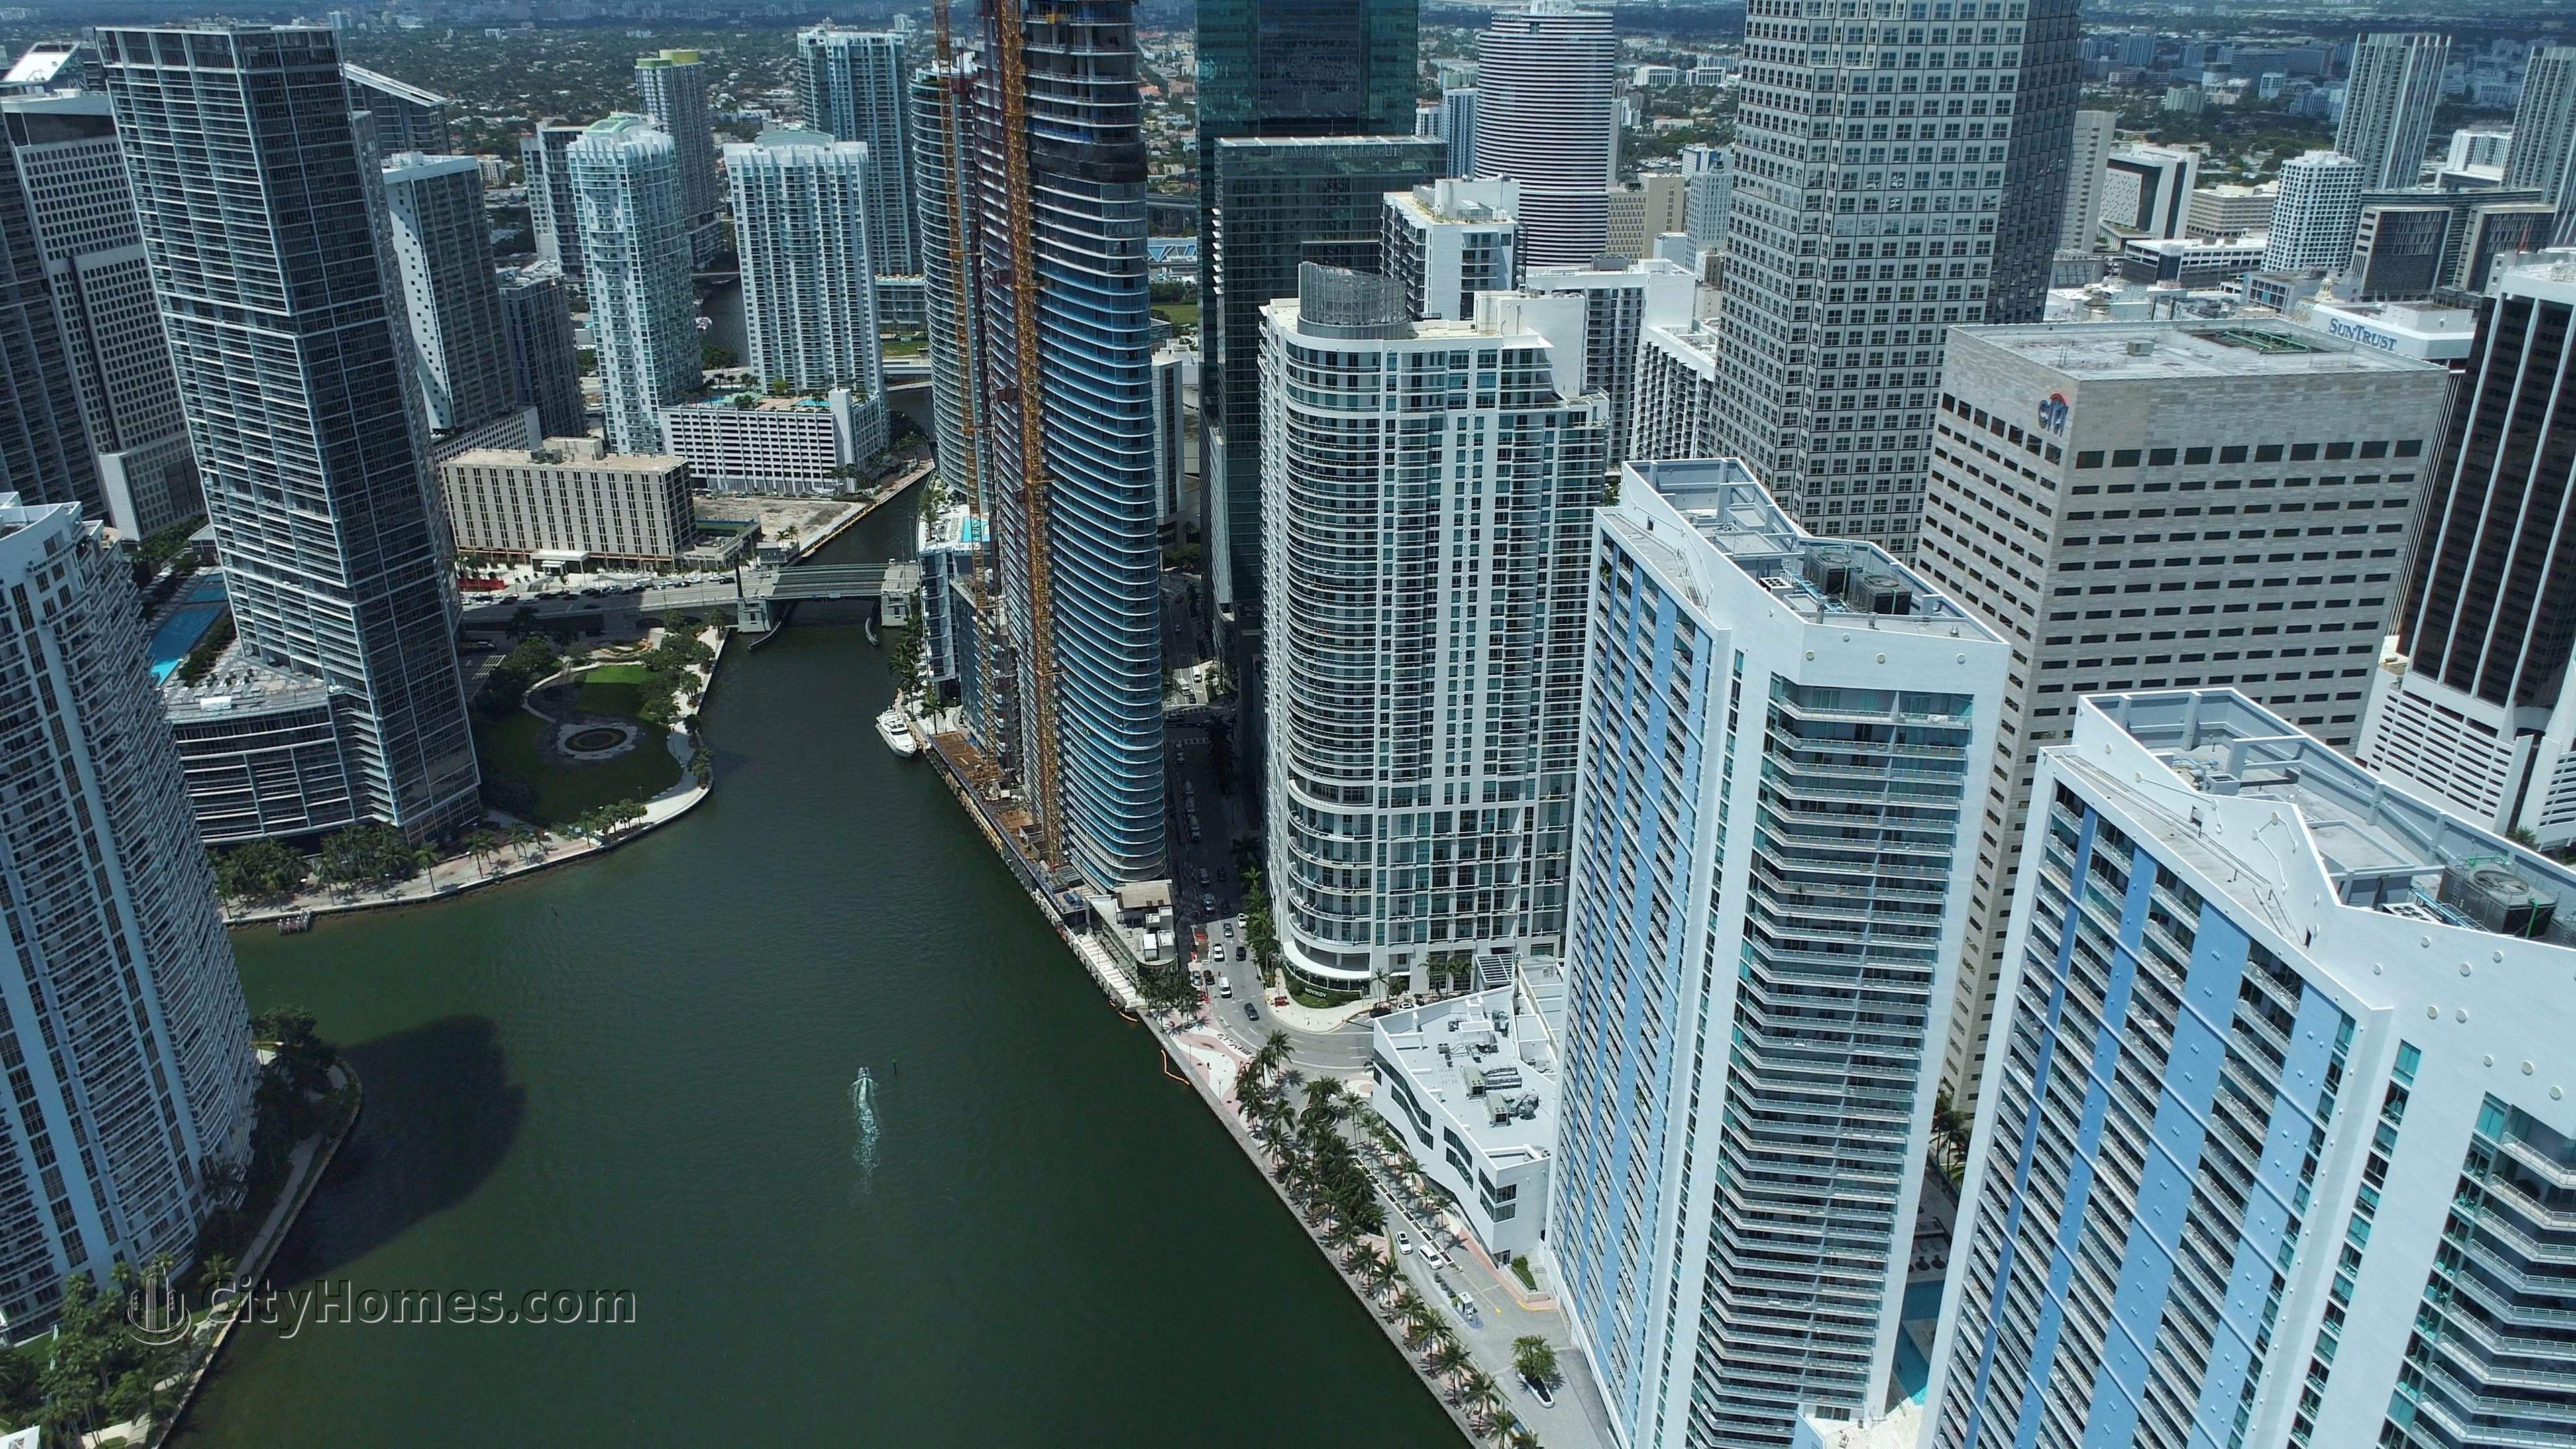 5. One Miami建於 325 And 335 S Biscayne Blvd, Miami, FL 33131